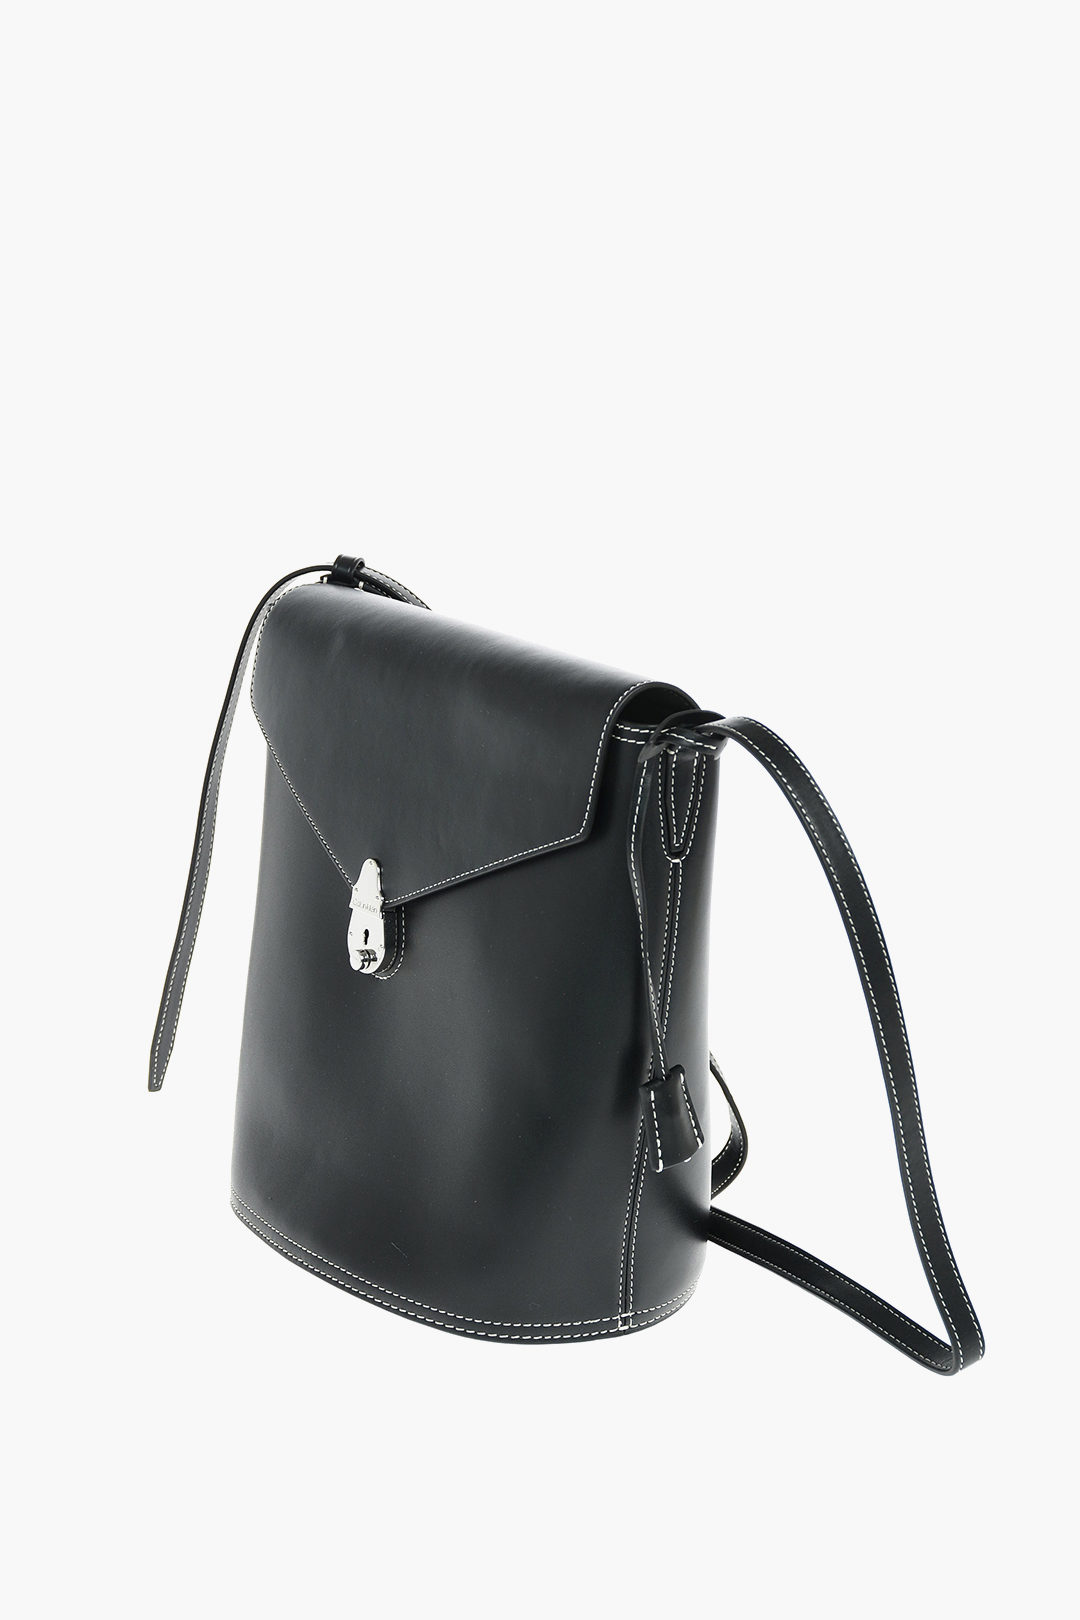 Calvin Klein Visible Stitching LOCK Leather Bucket Bag women - Glamood  Outlet